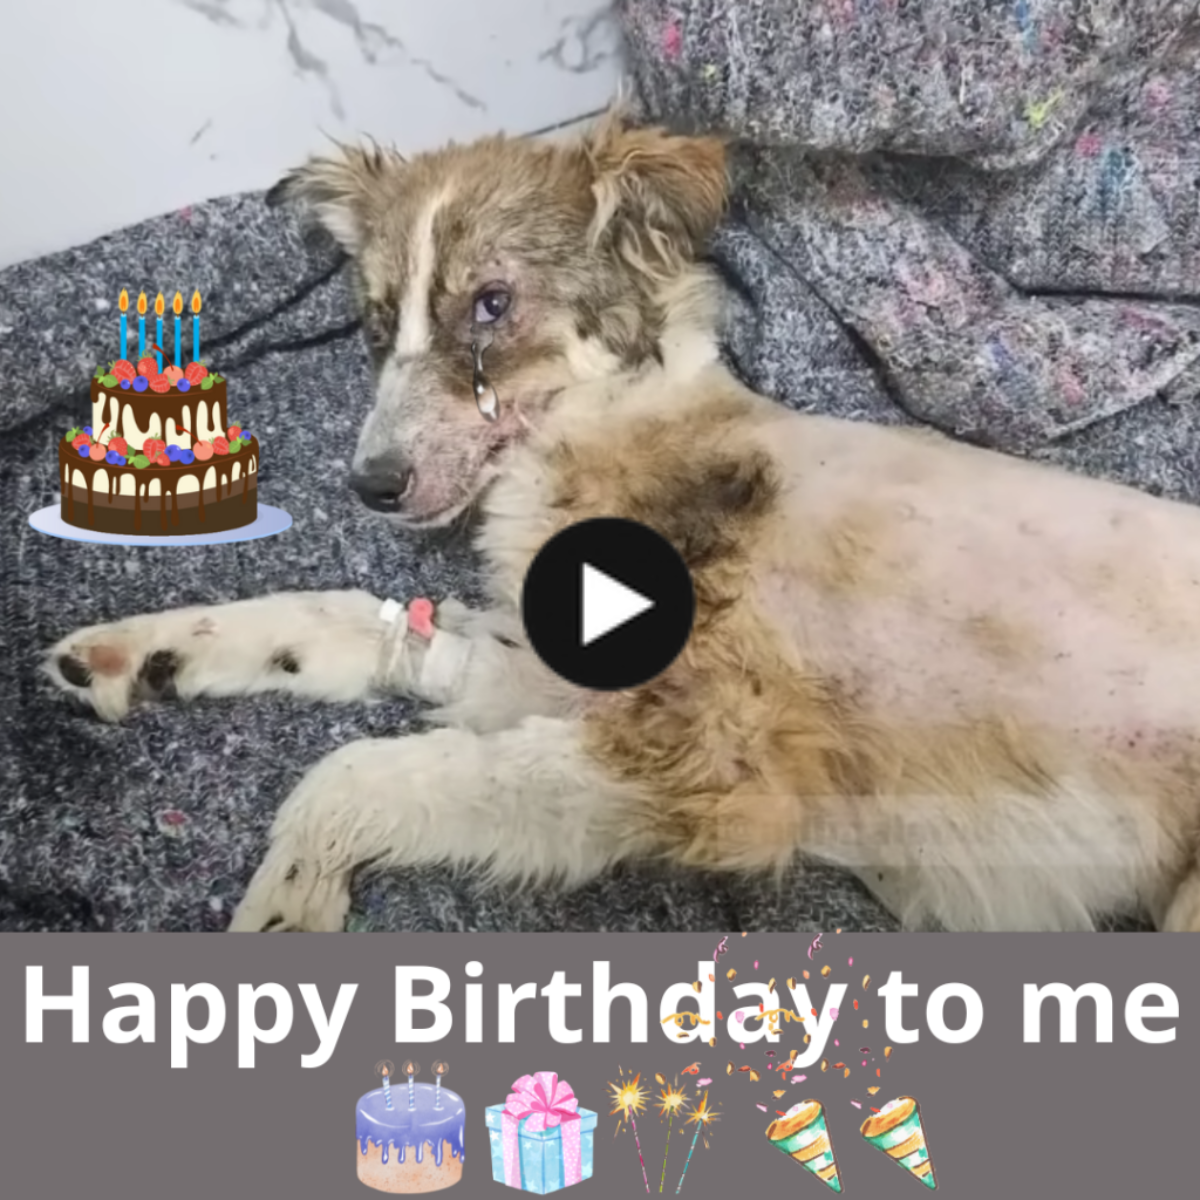 The Forgotten Soul’s Birthday: A Dog’s Ten-Year Journey to Freedom